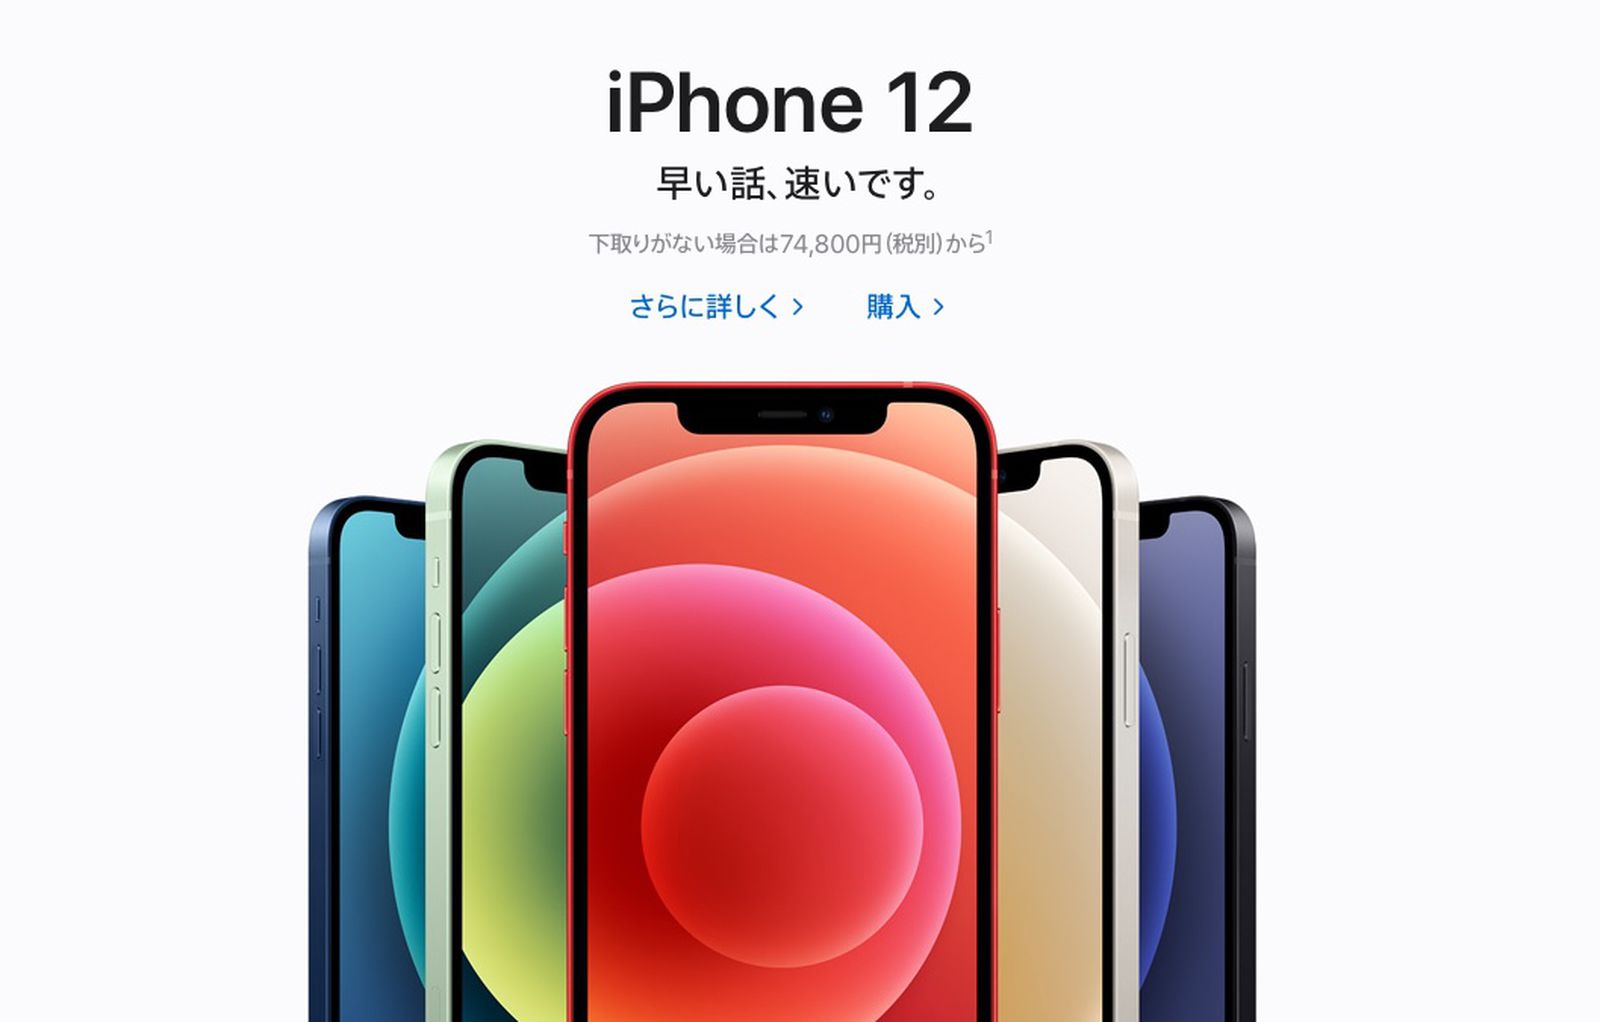 Apple has dominated the smartphone market in Japan in 2020